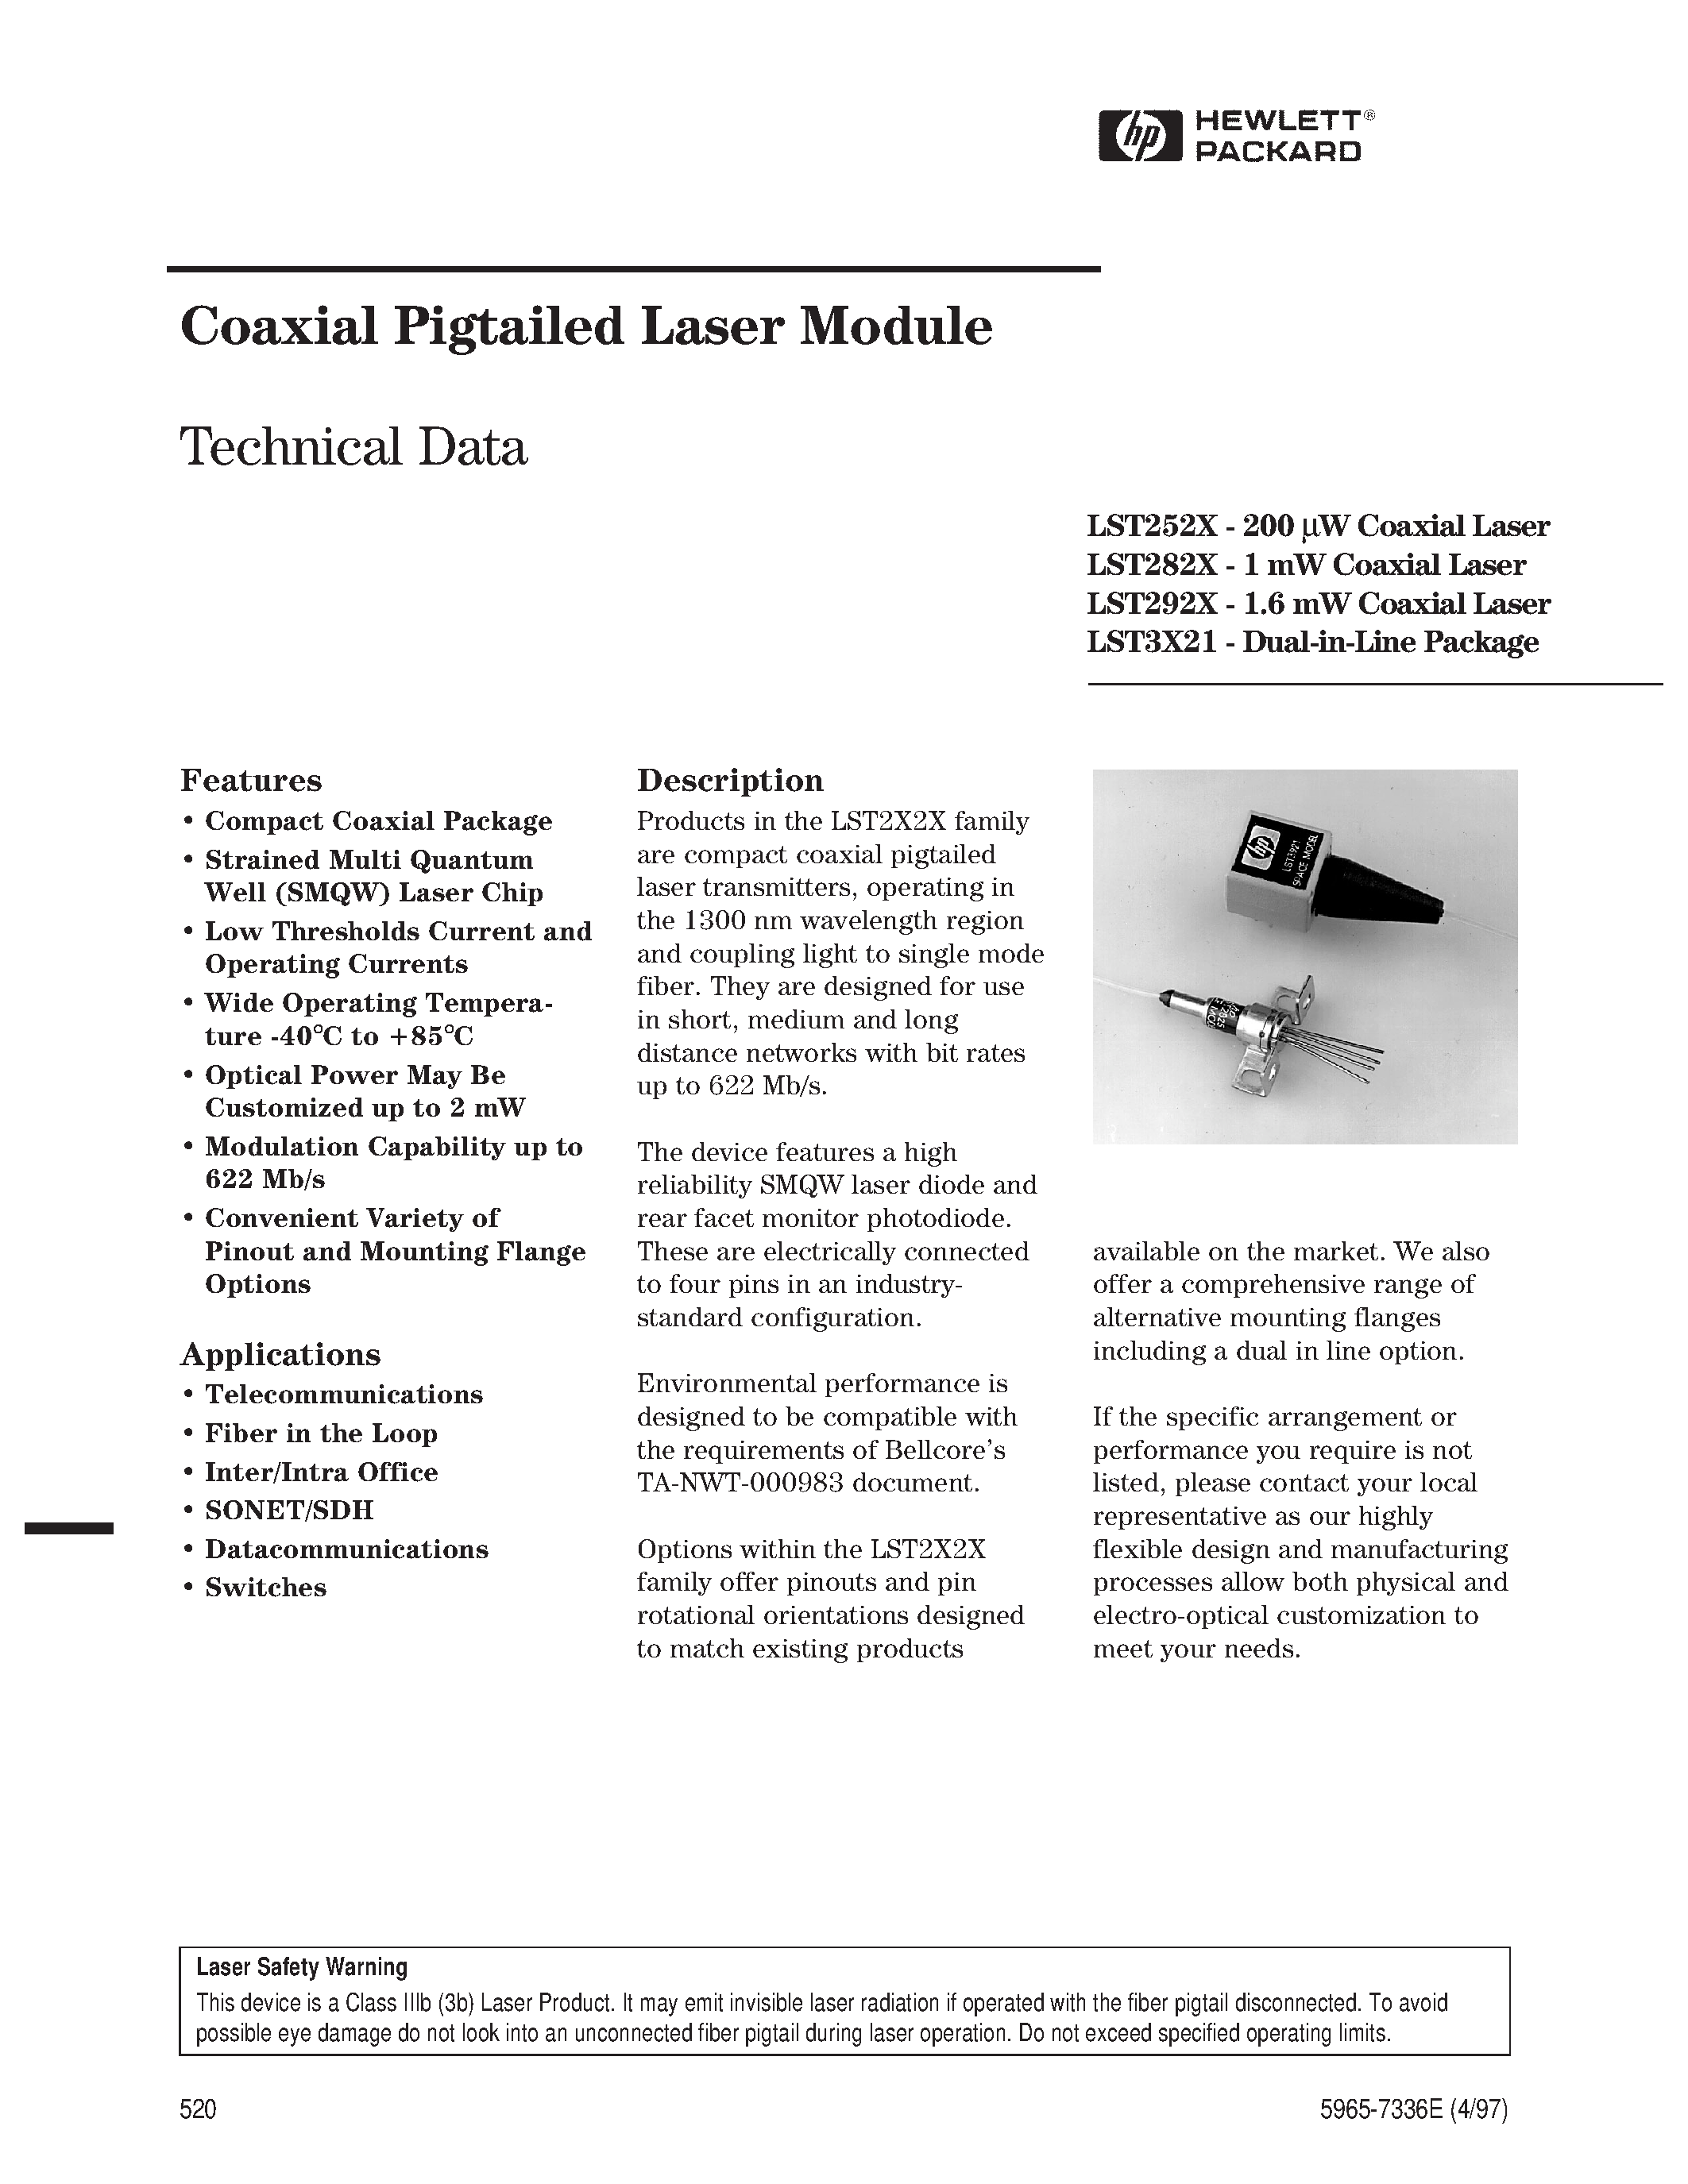 Даташит LST2925-S4-B-SC - Coaxial Pigtailed Laser Module страница 1